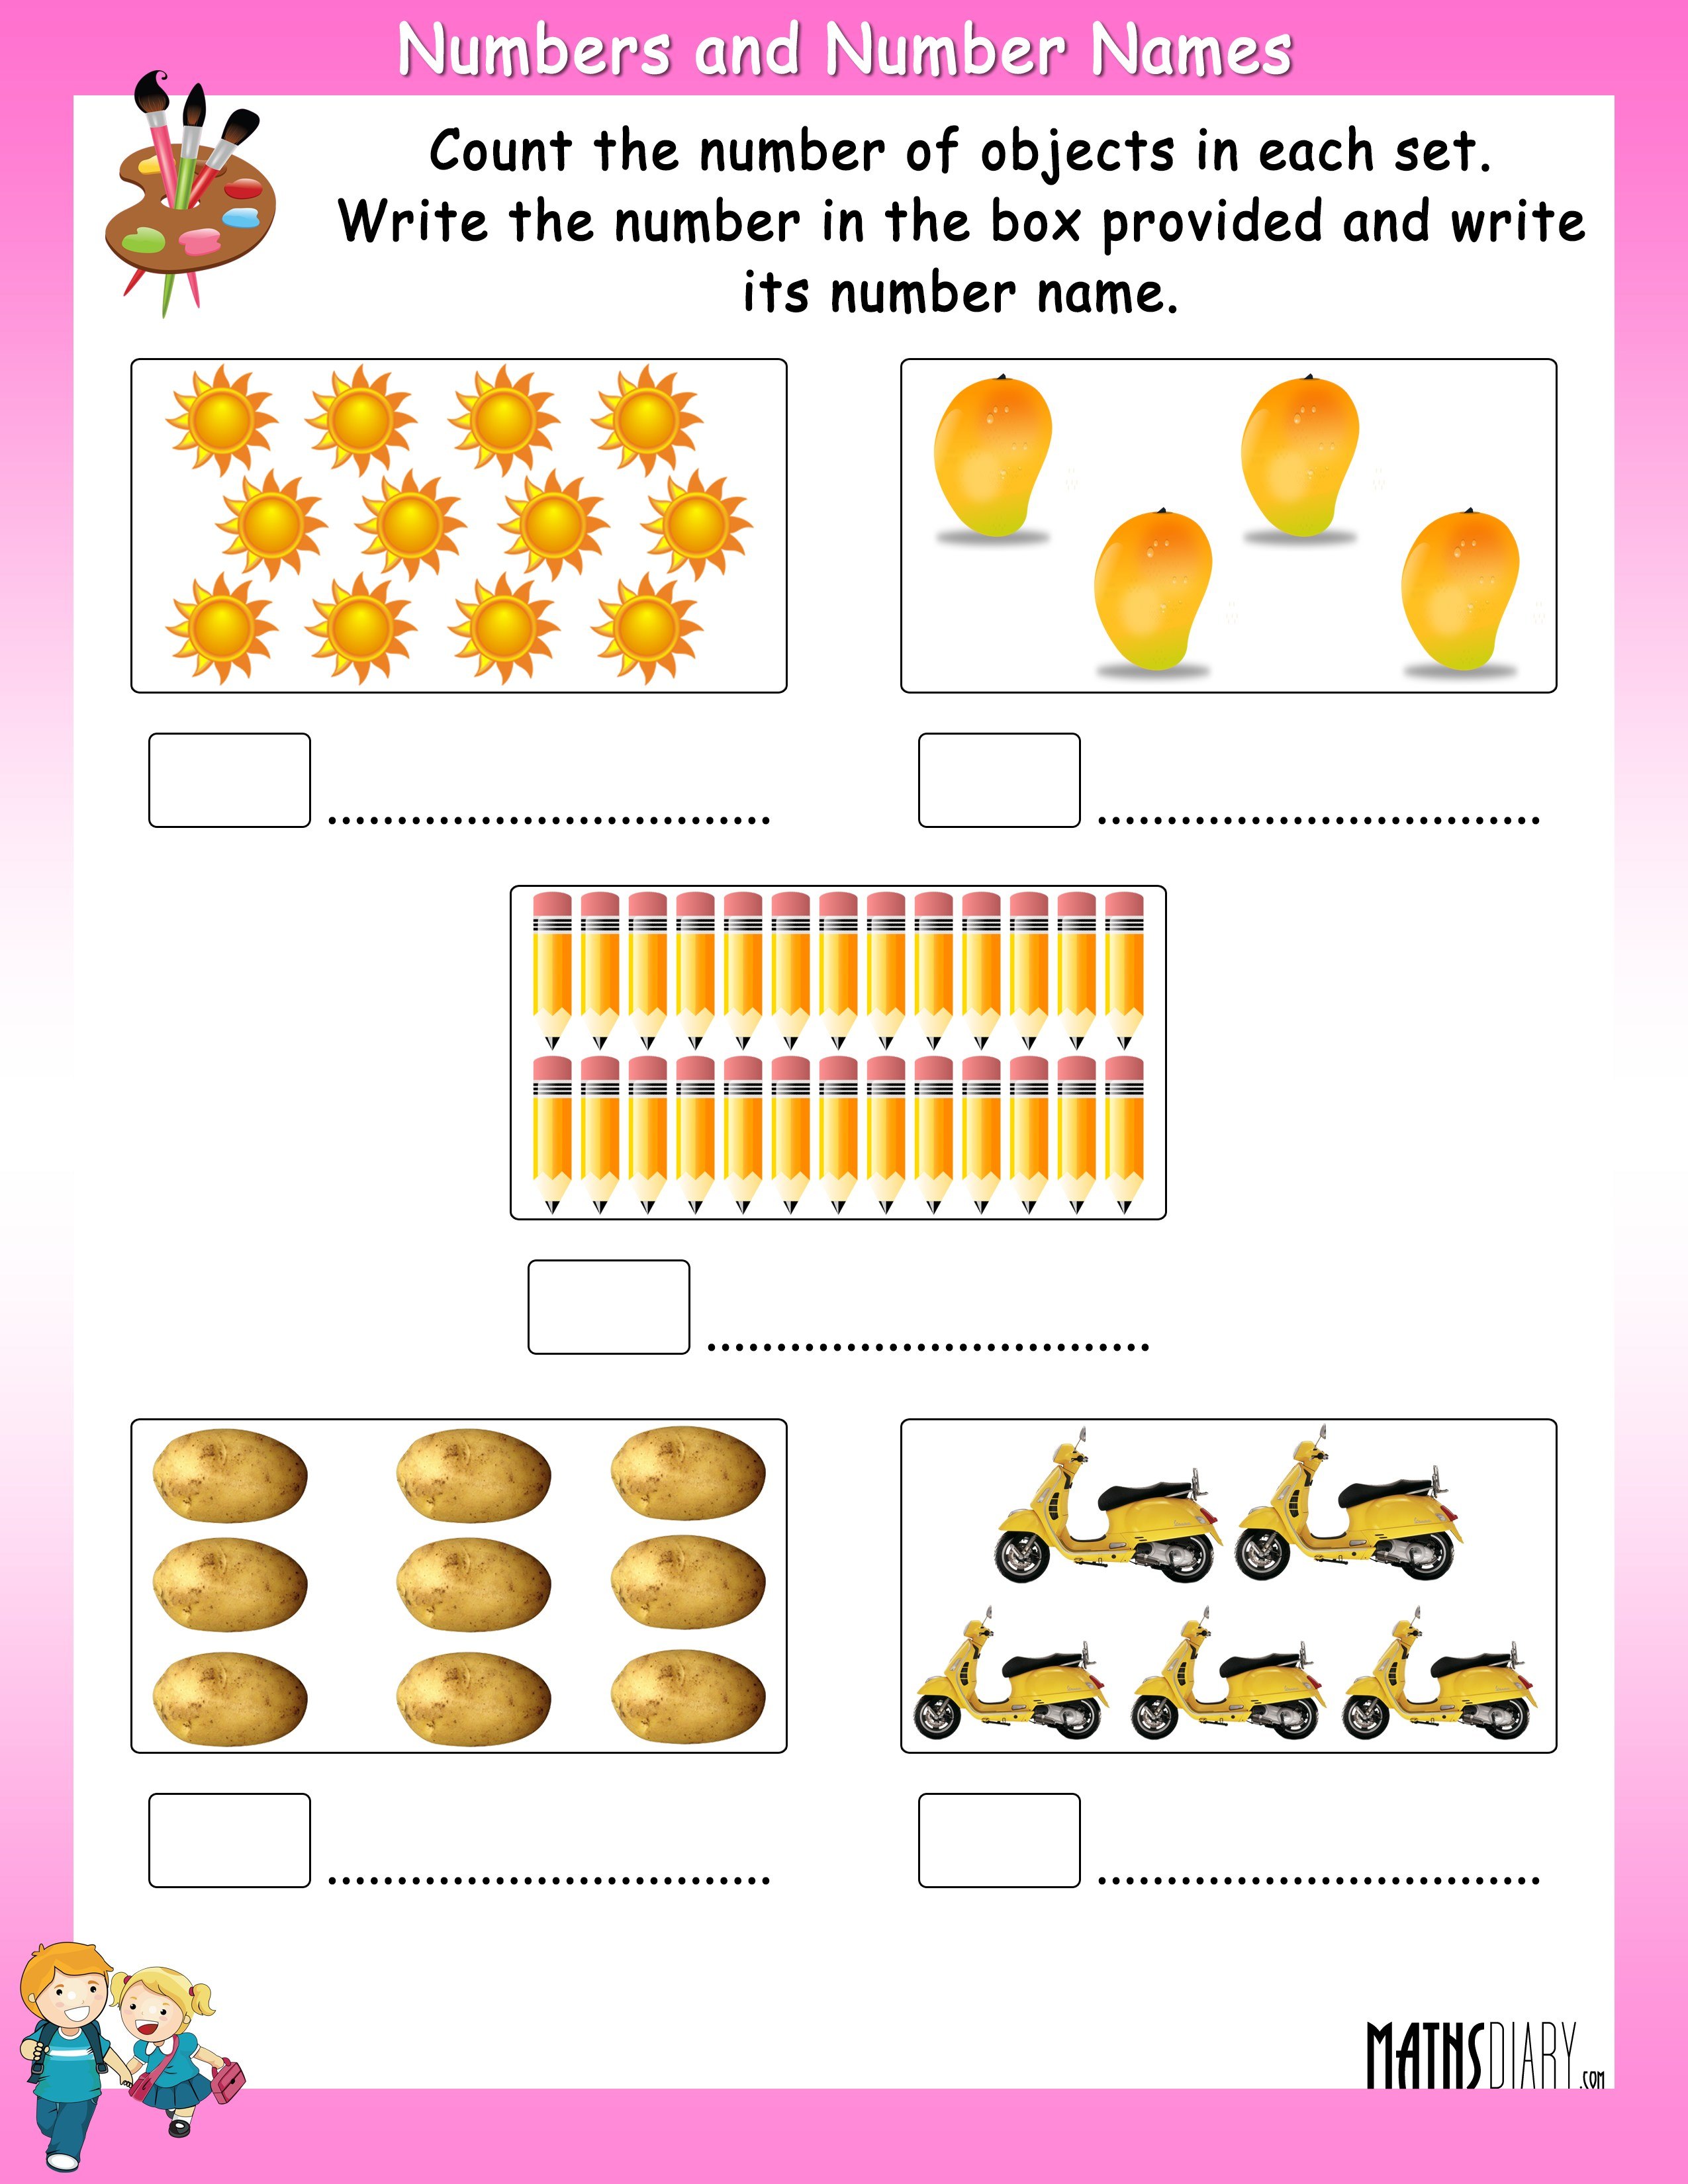 number-names-1-to-20-free-printable-pdf-for-preschool-kids-learning